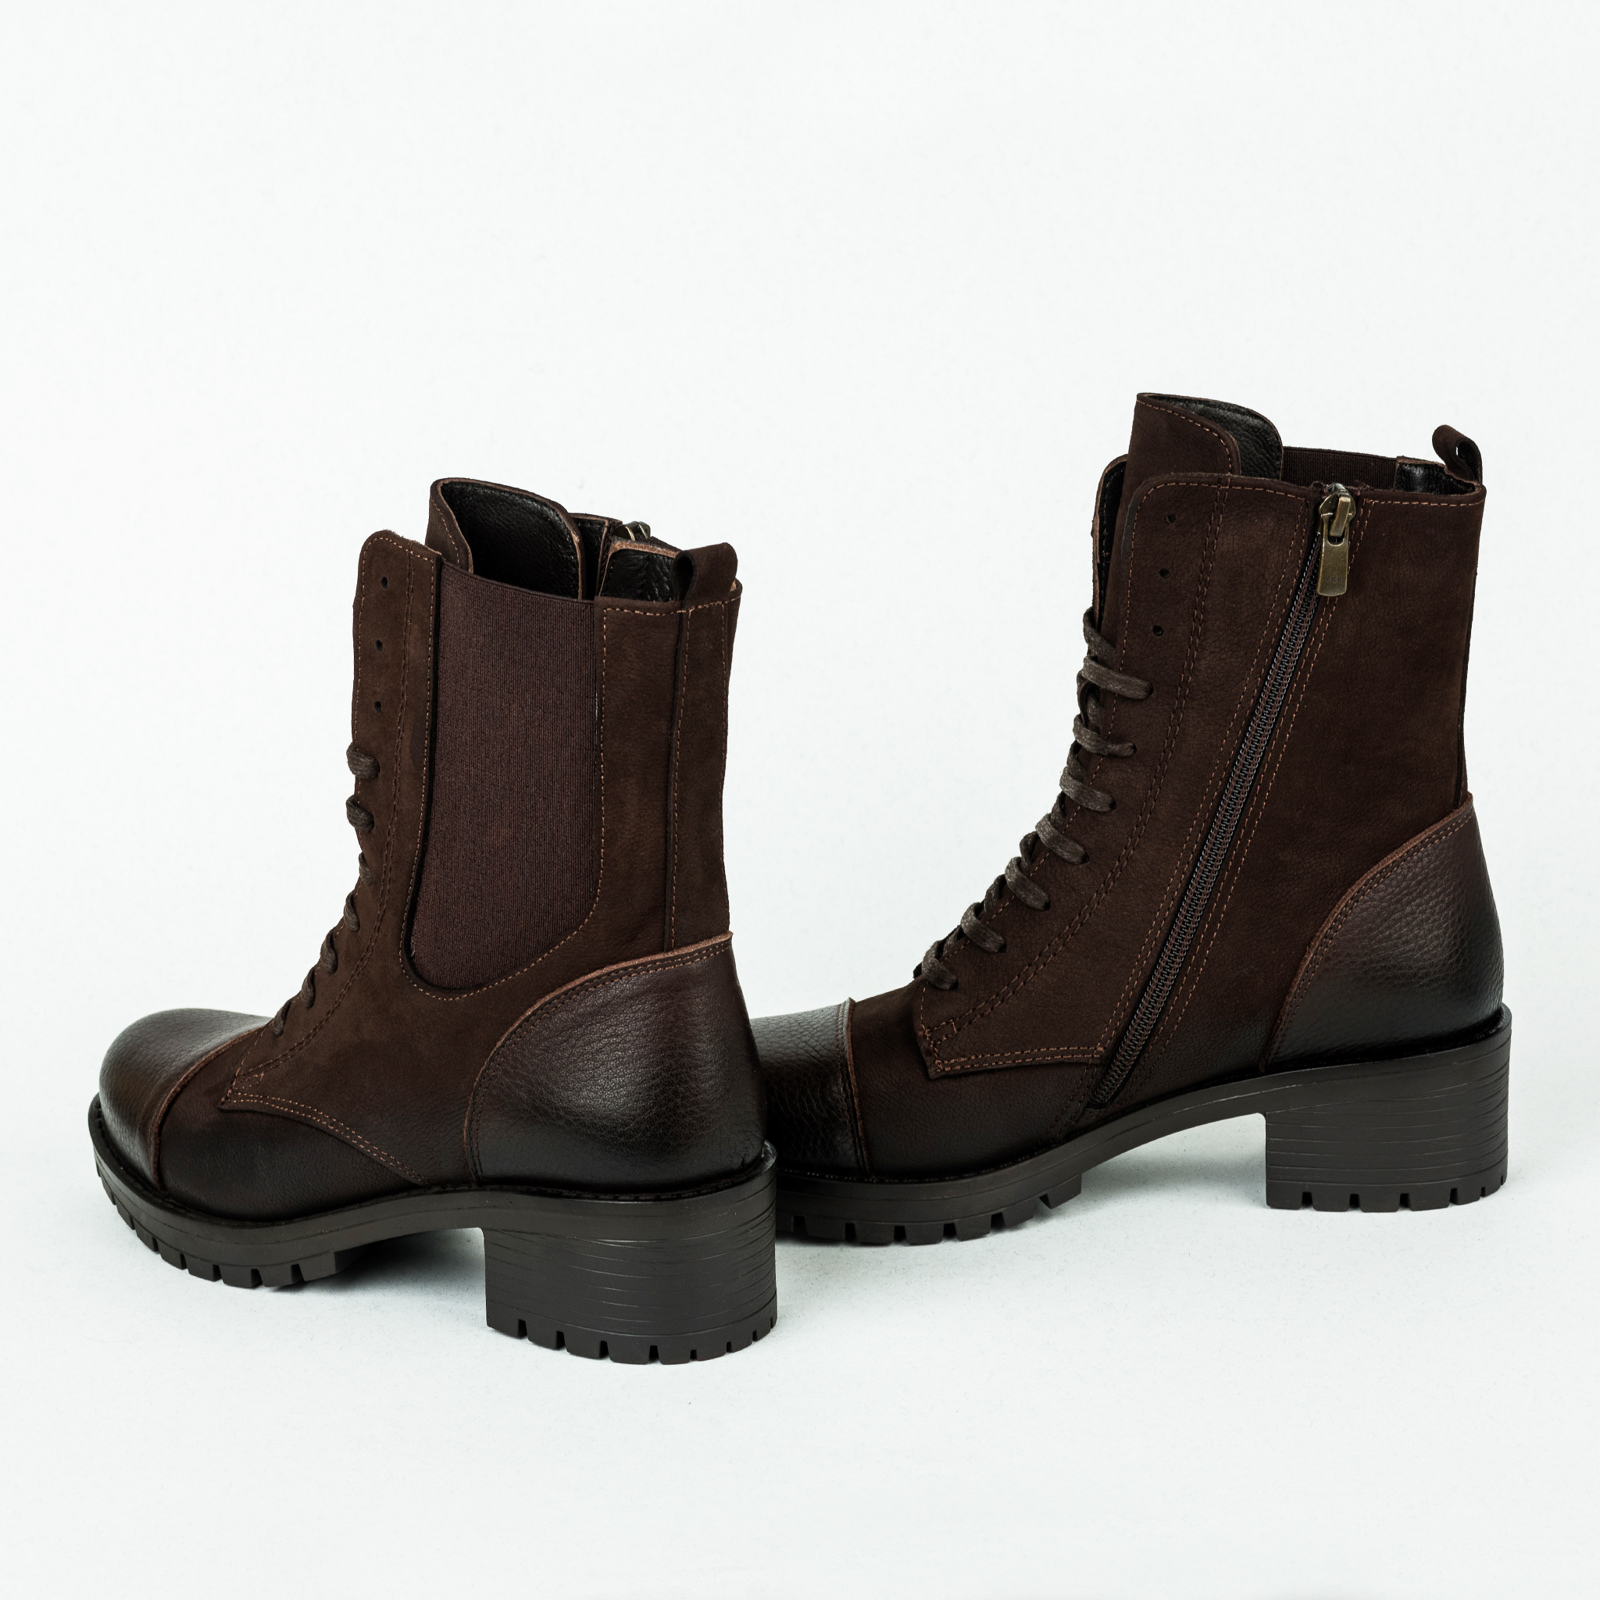 Leather ankle boots B088 - BROWN